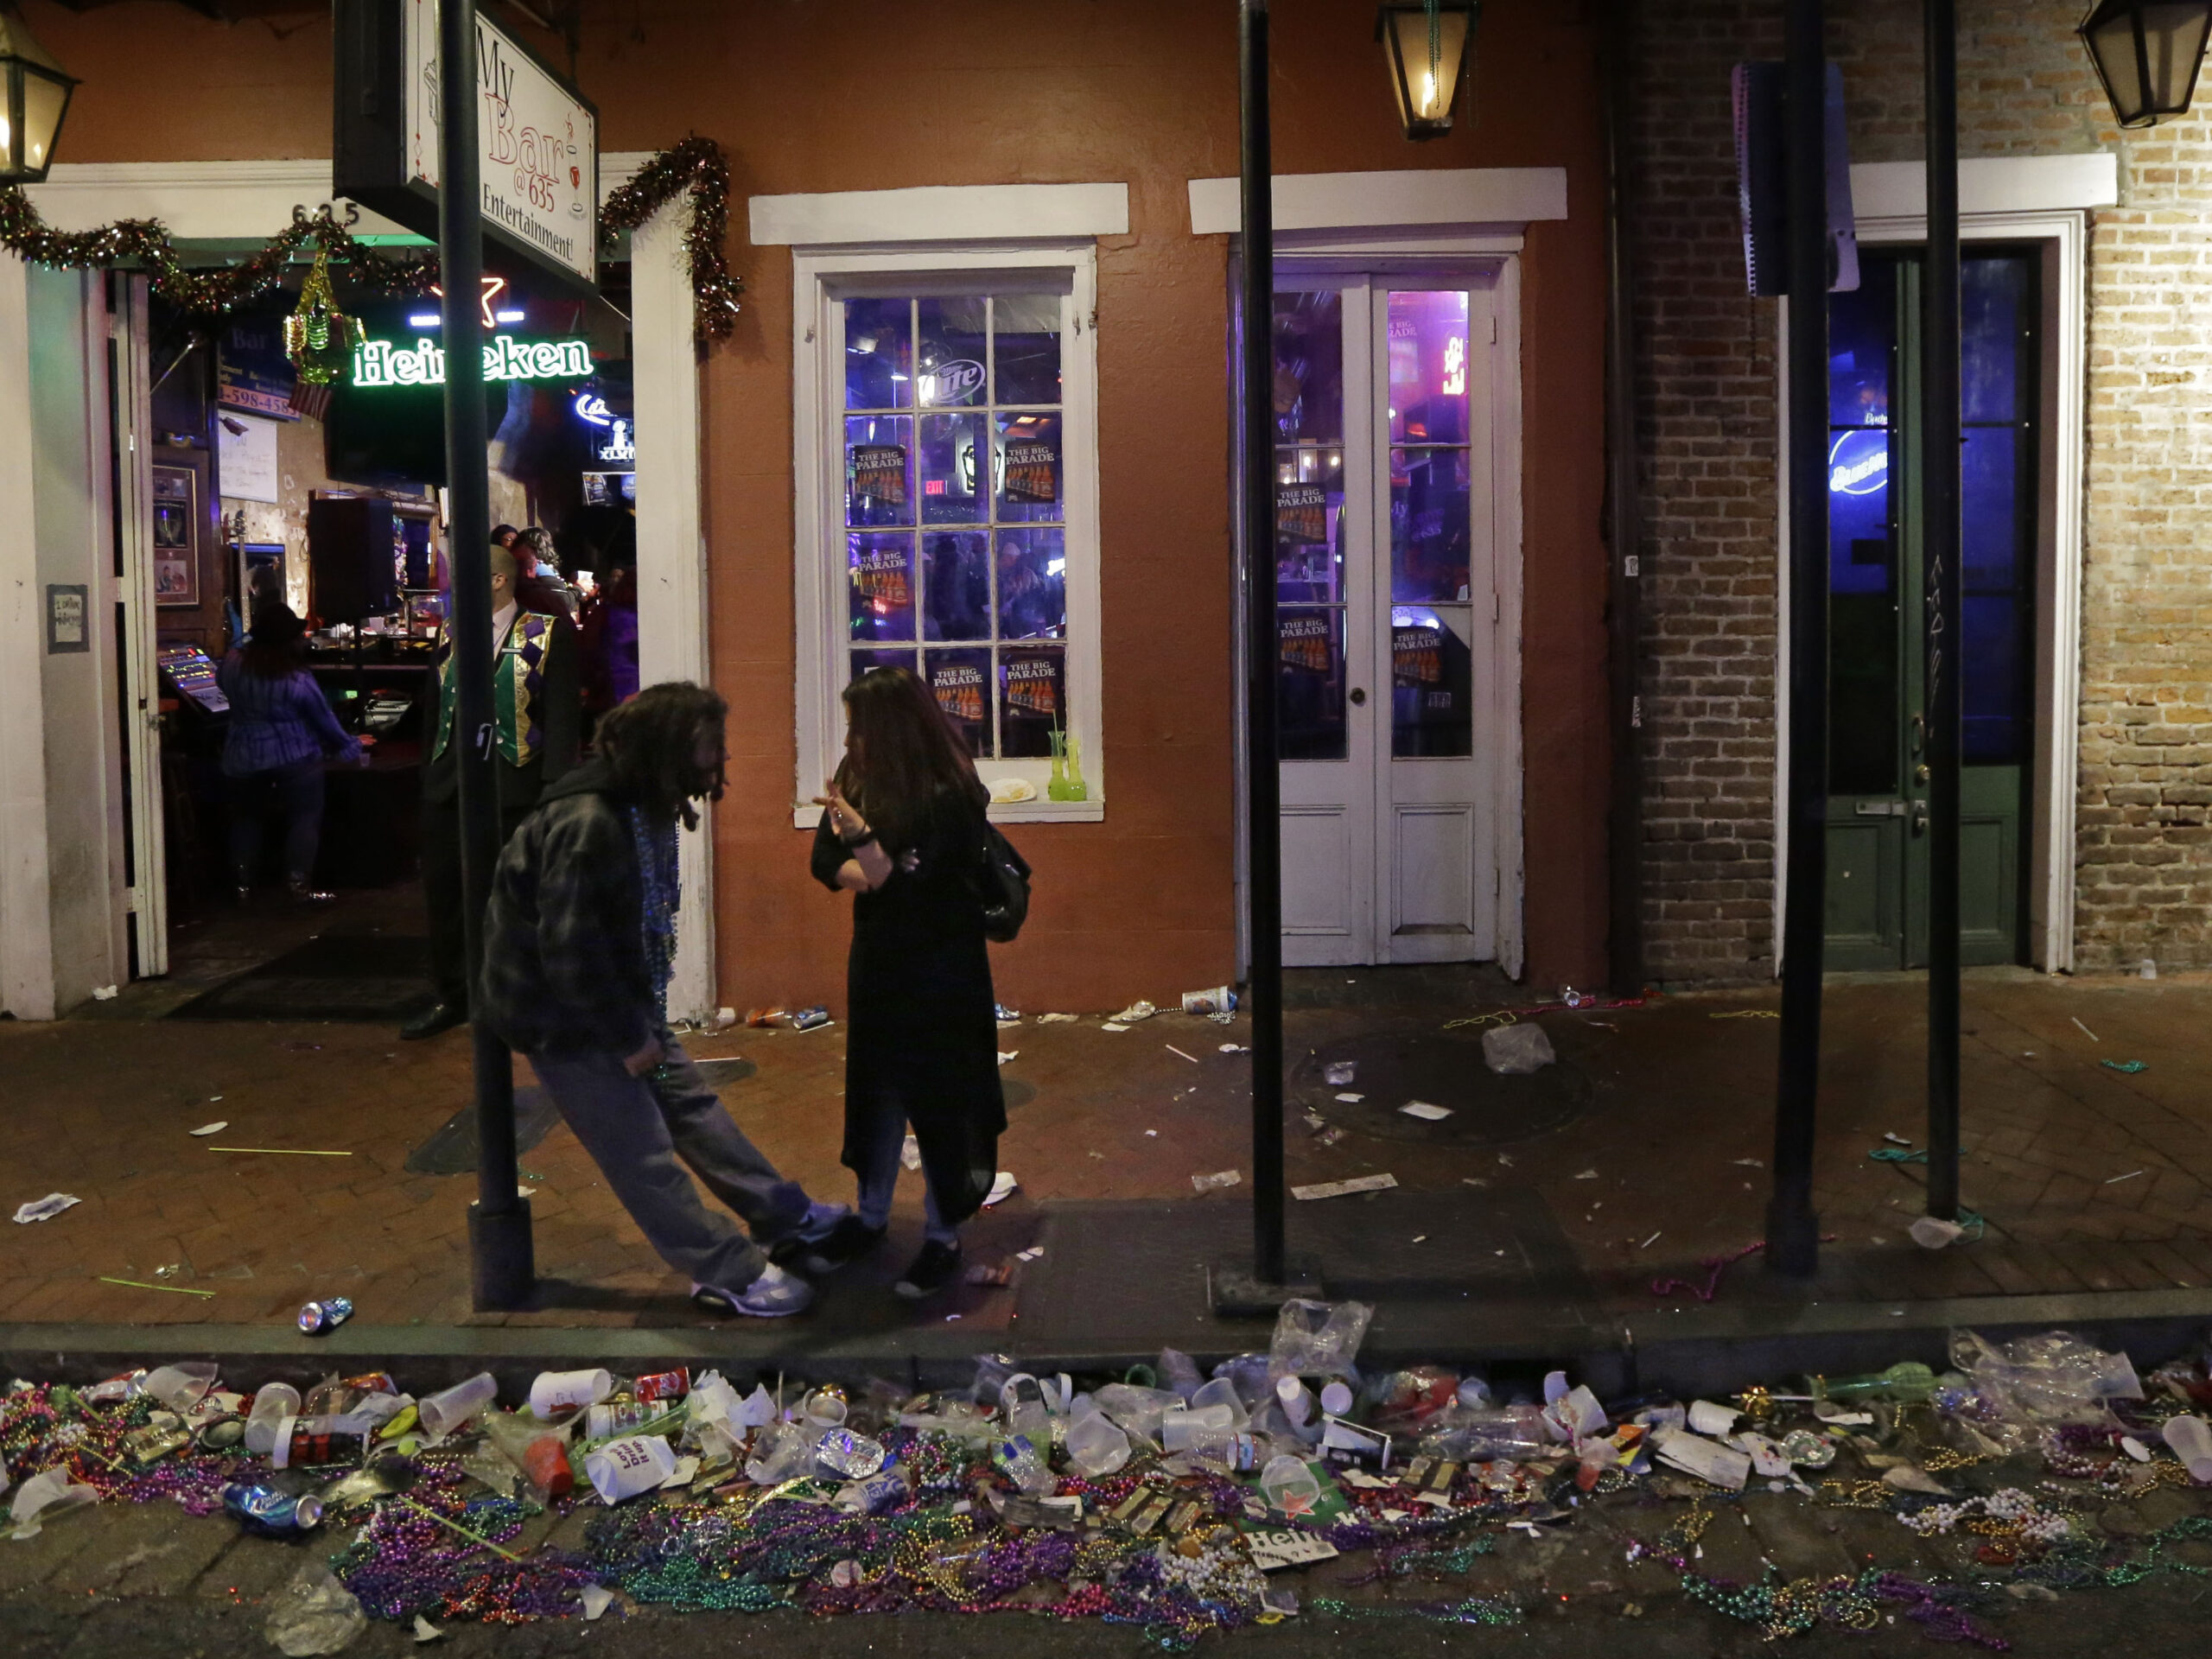 Mardi Gras beads in New Orleans are creating an environmental concern